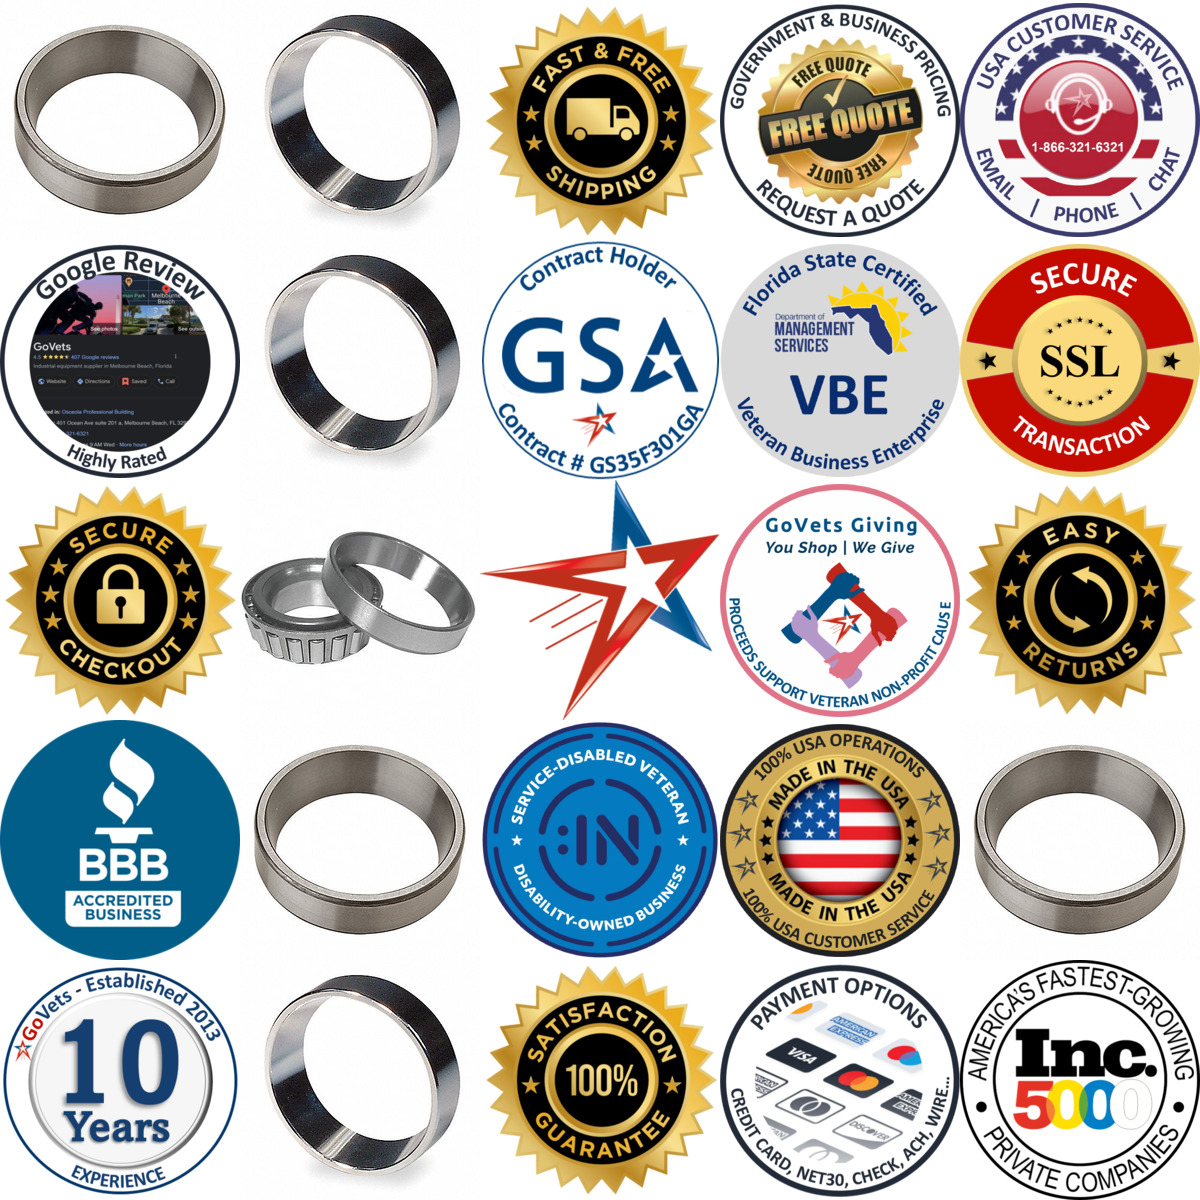 A selection of Tapered Roller Bearing Cups products on GoVets